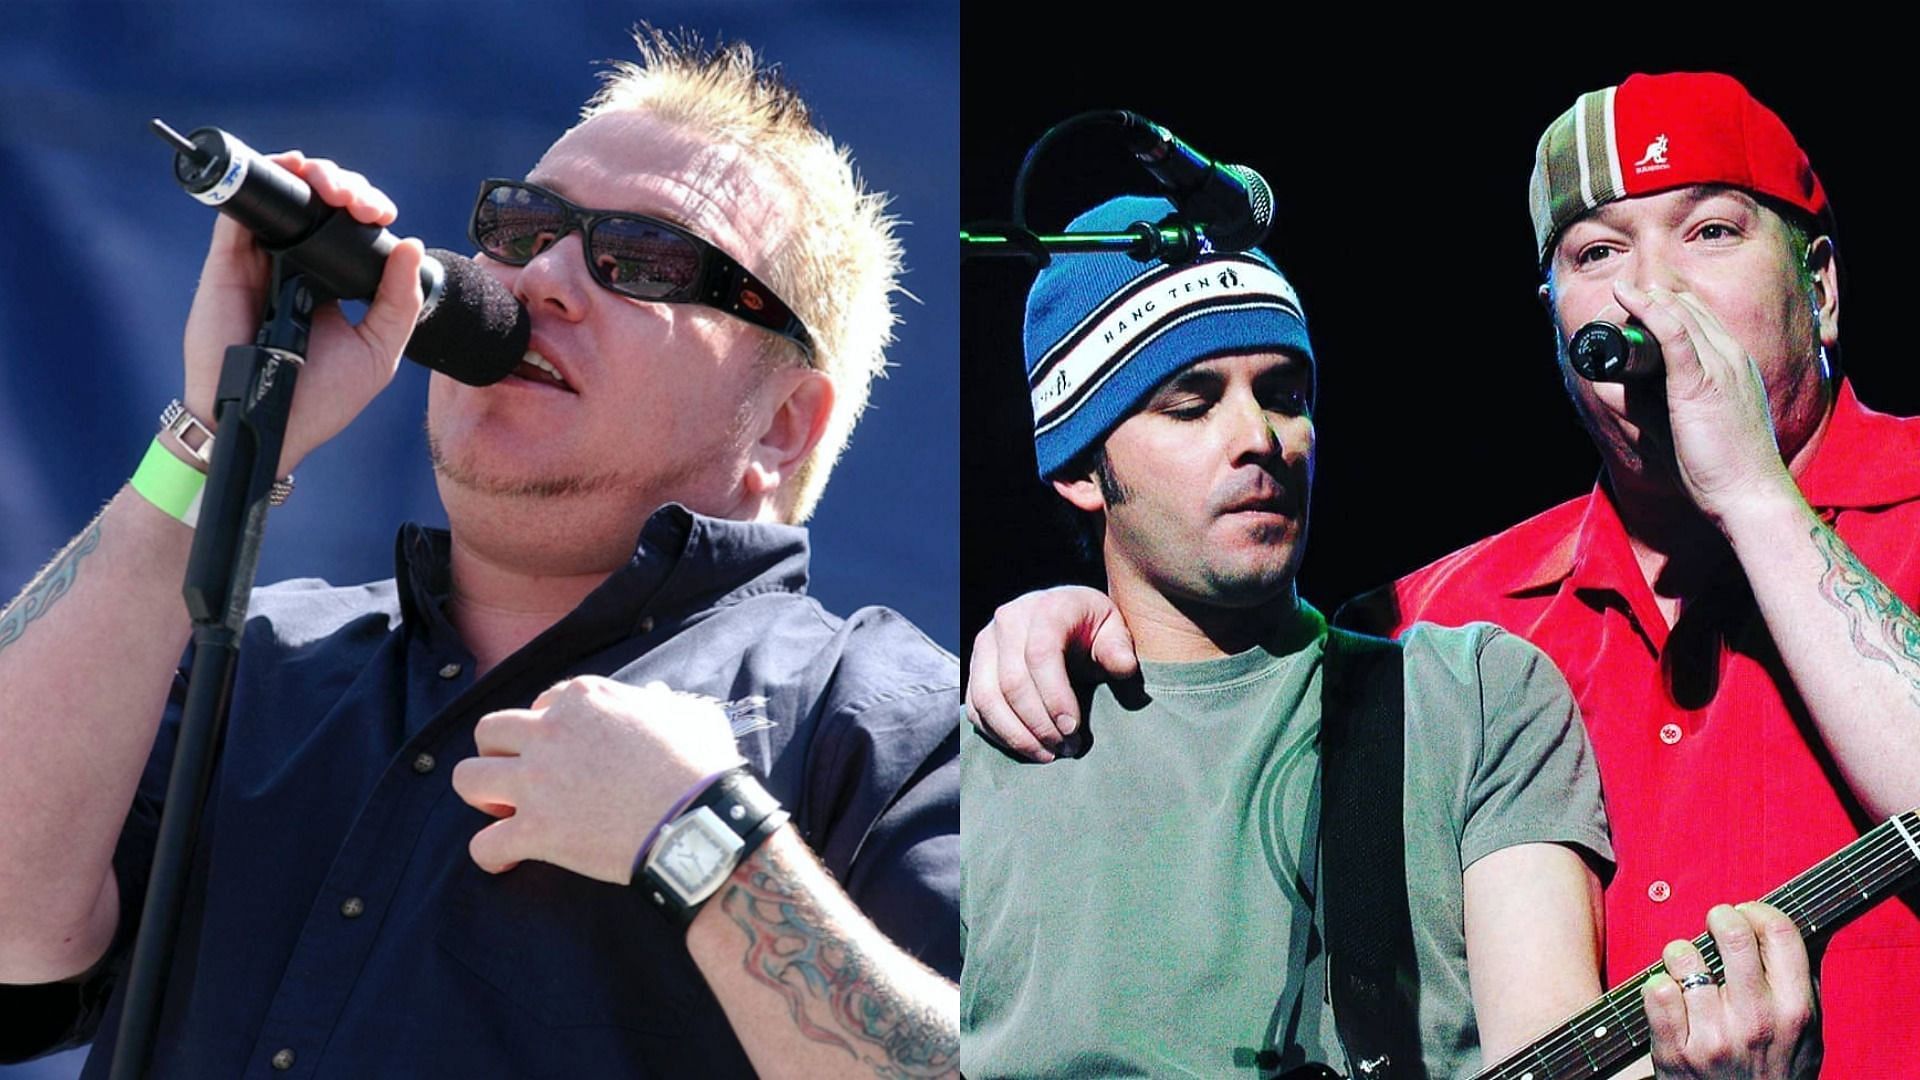 Smash Mouth Frontman Steve Harwell Quits Band After Bizarre Onstage Rant